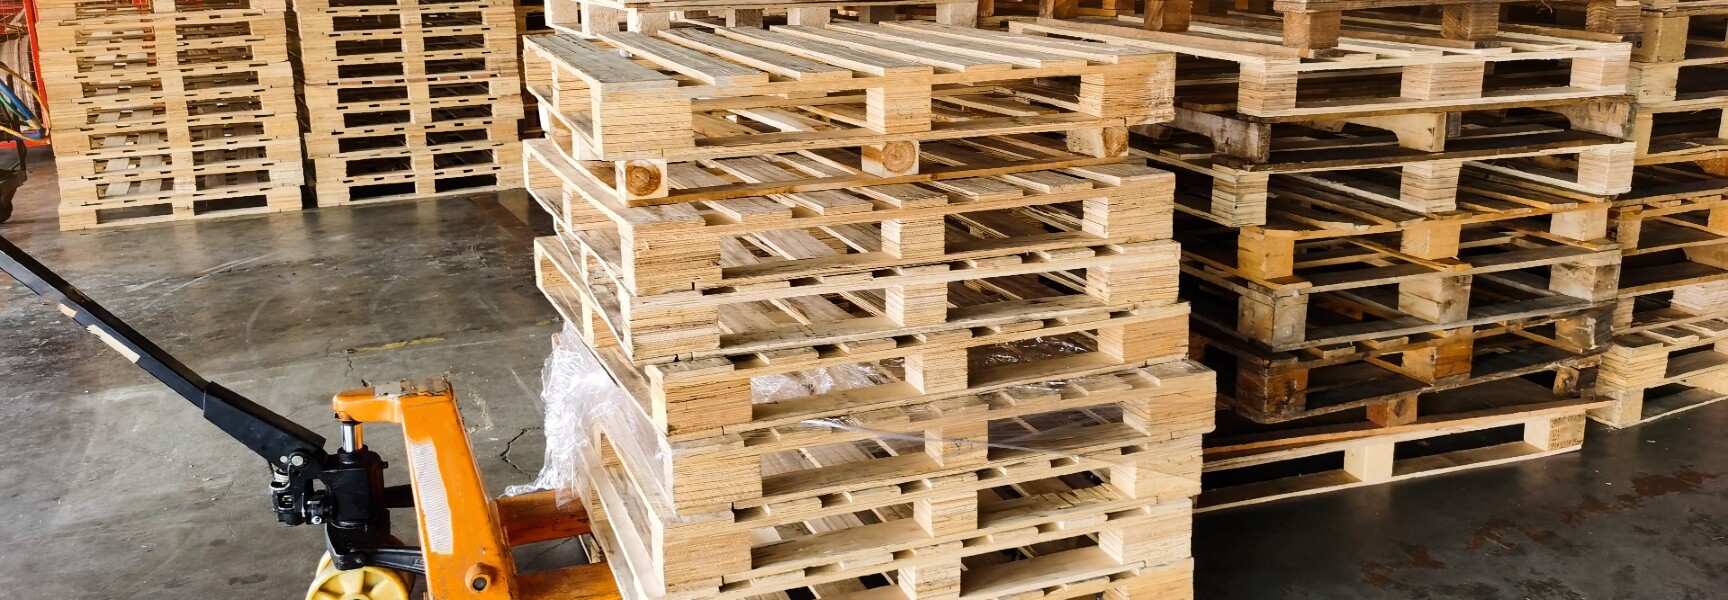 A person collecting pallets from a warehouse, with stacks of wooden pallets in the background.